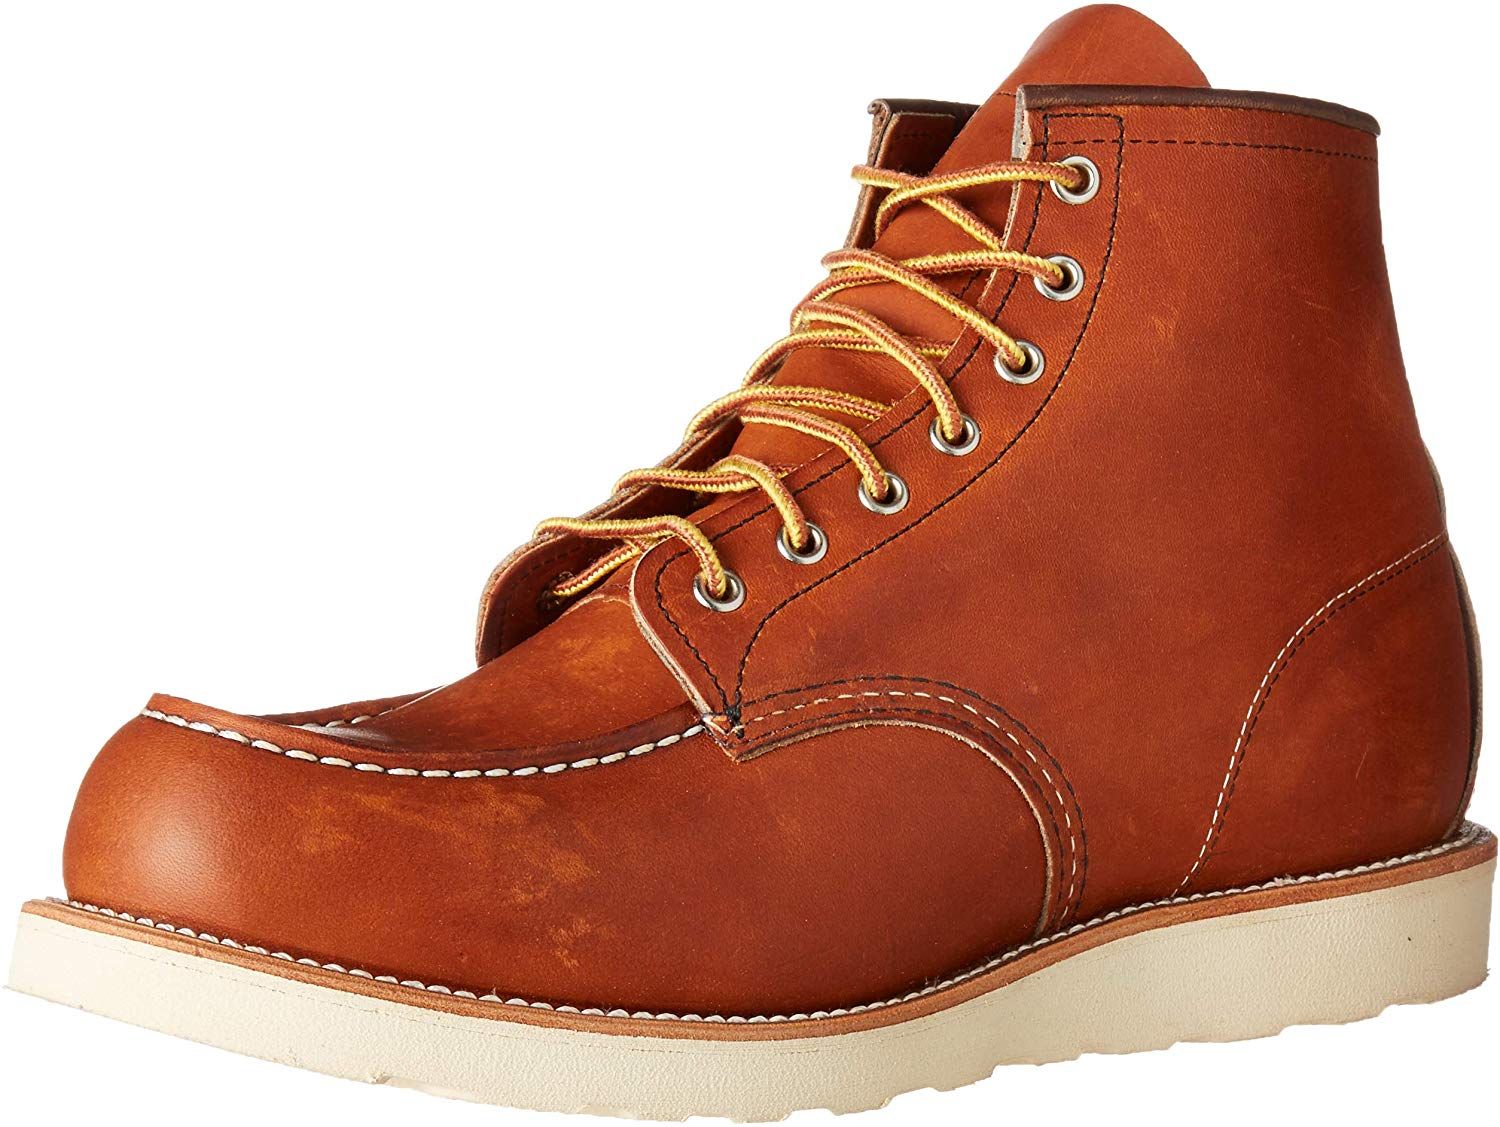 red wing work boots amazon